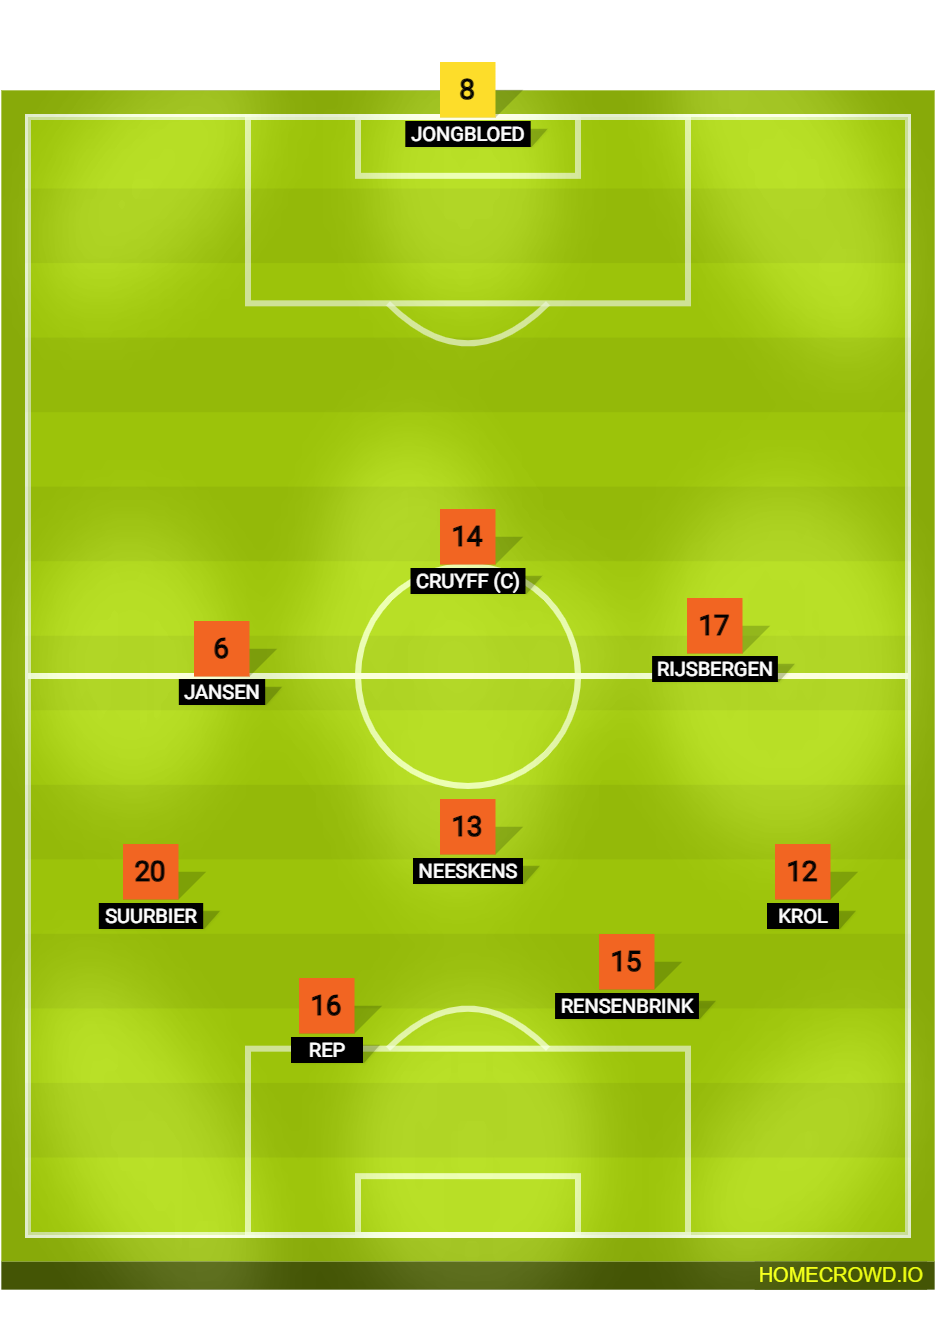 Netherlands 1974 Total Football lineup 11 with Johan Cruyff and positional fluidity, highlighting backs transforming to wingers and innovative tactics under Rinus Michels